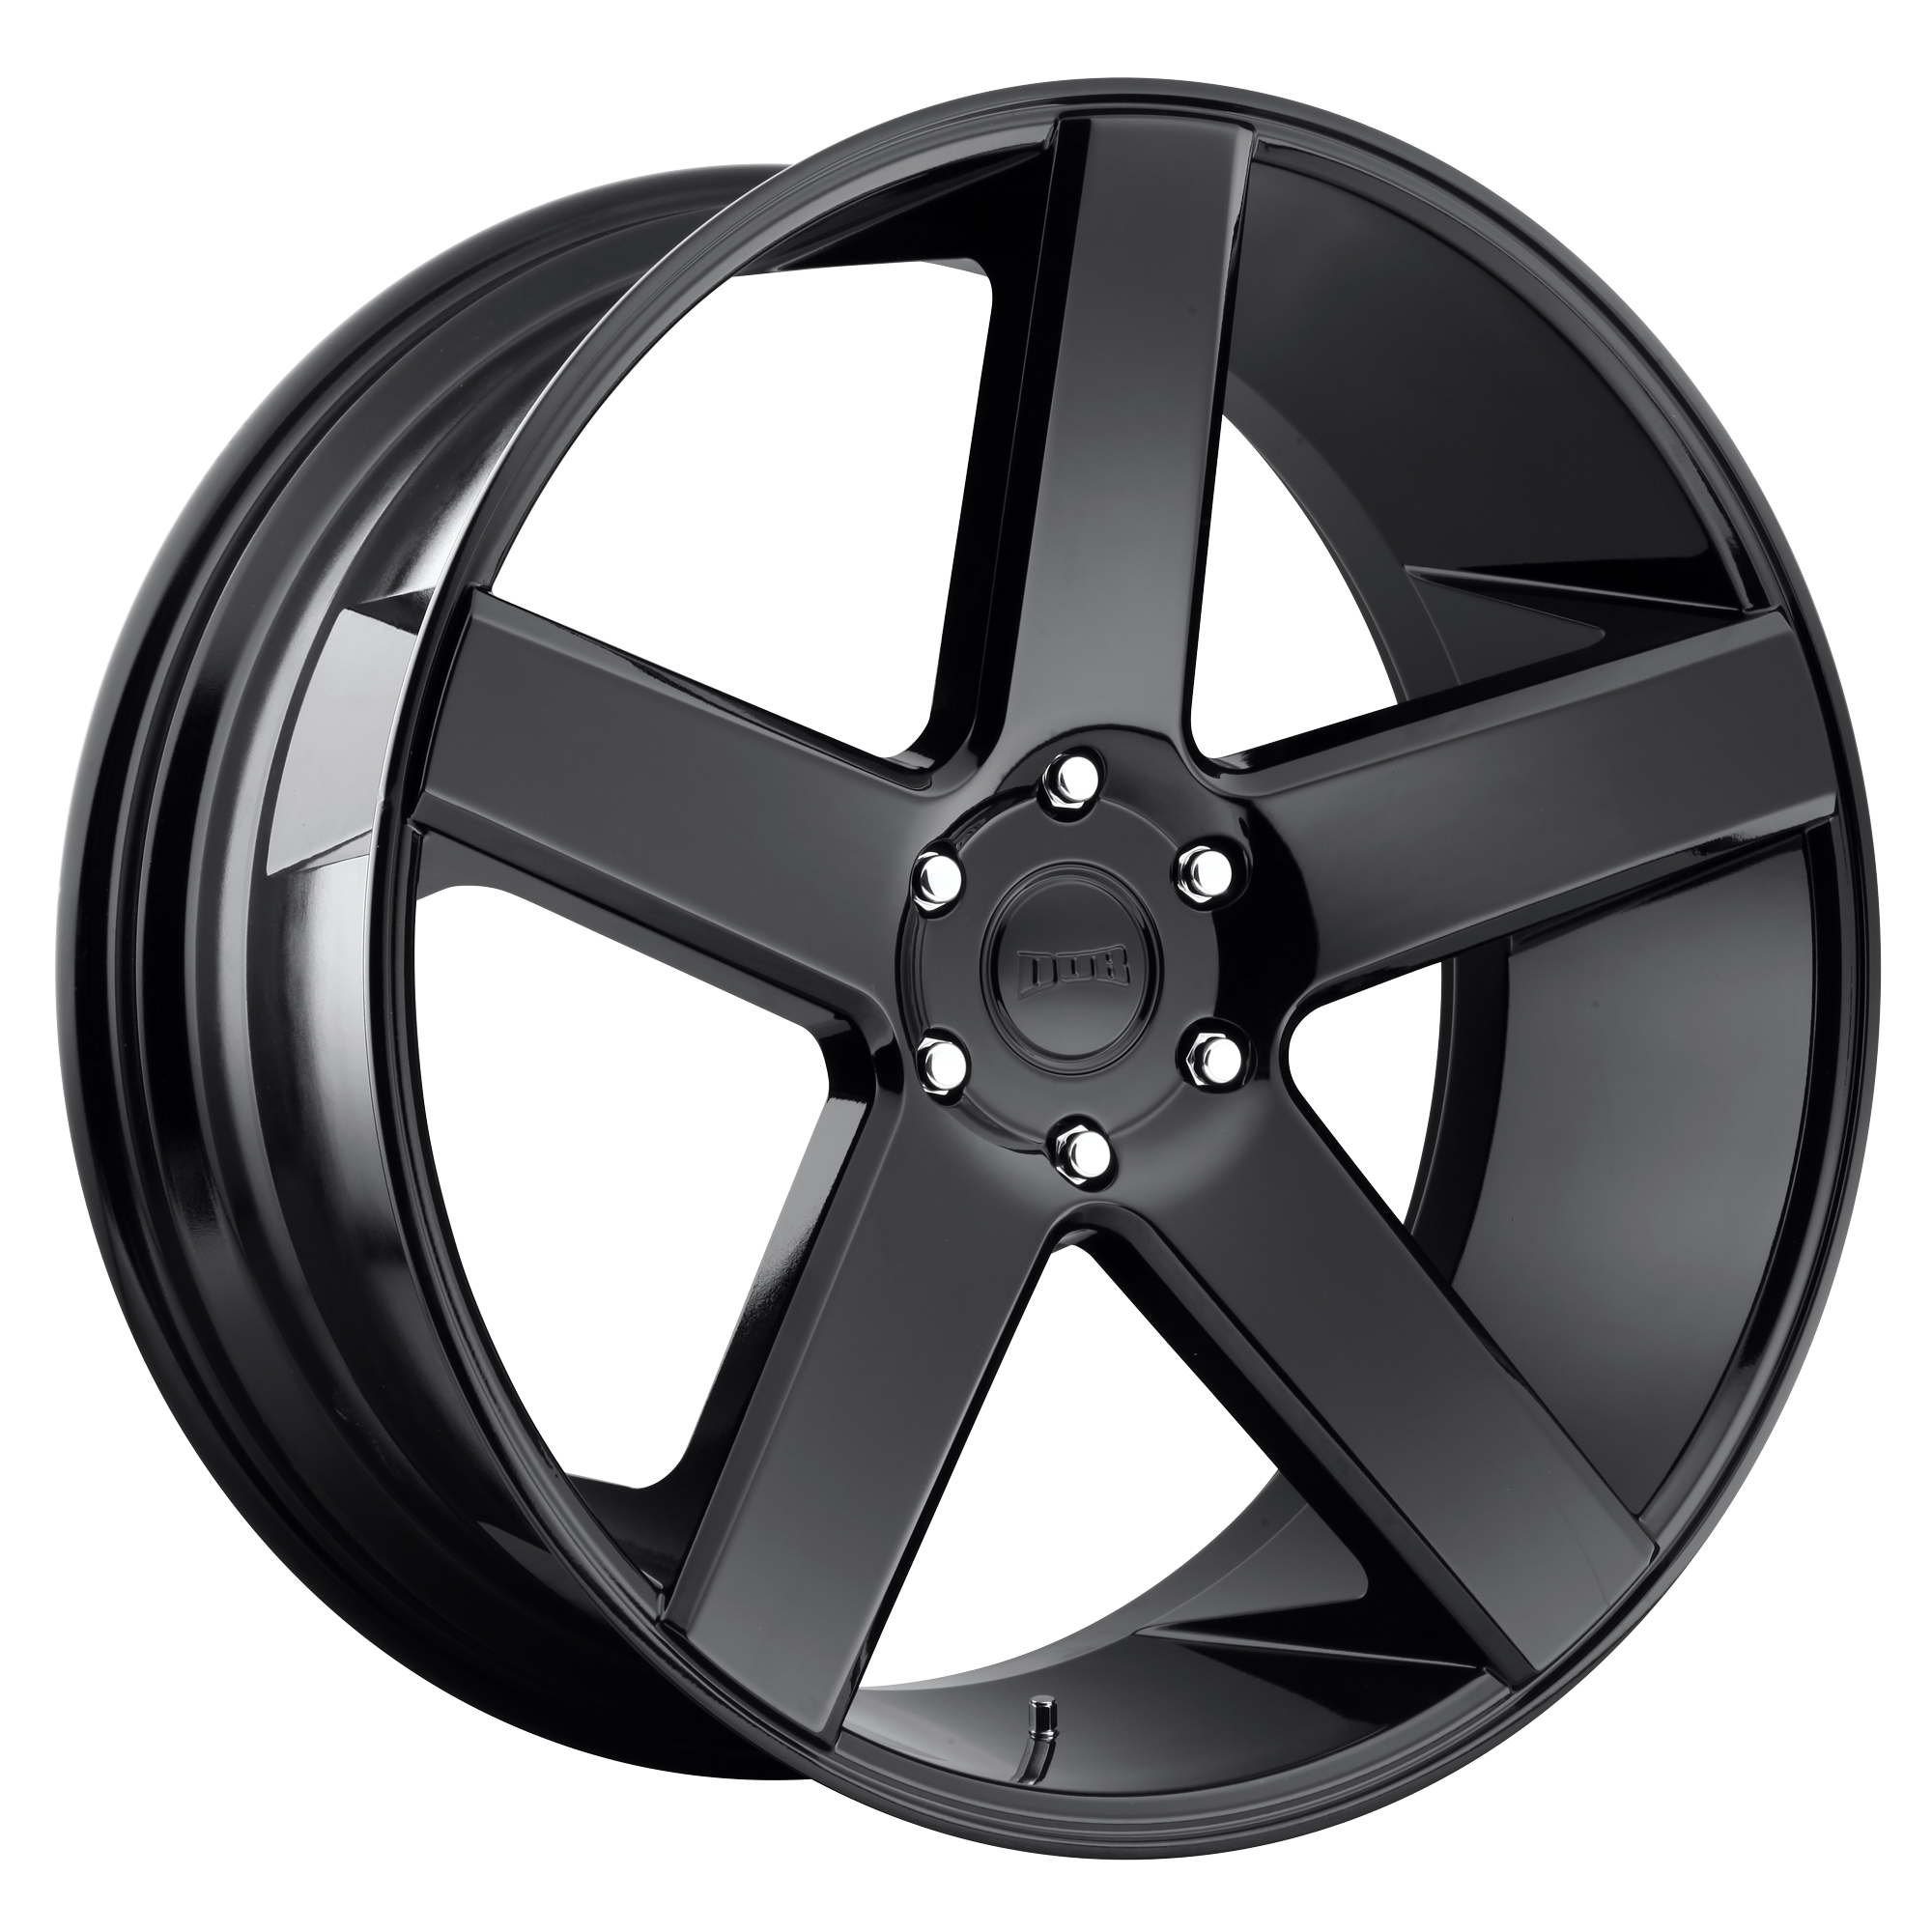 BALLER 22x8.5 5x114.30 GLOSS BLACK (38 mm) - Tires and Engine Performance